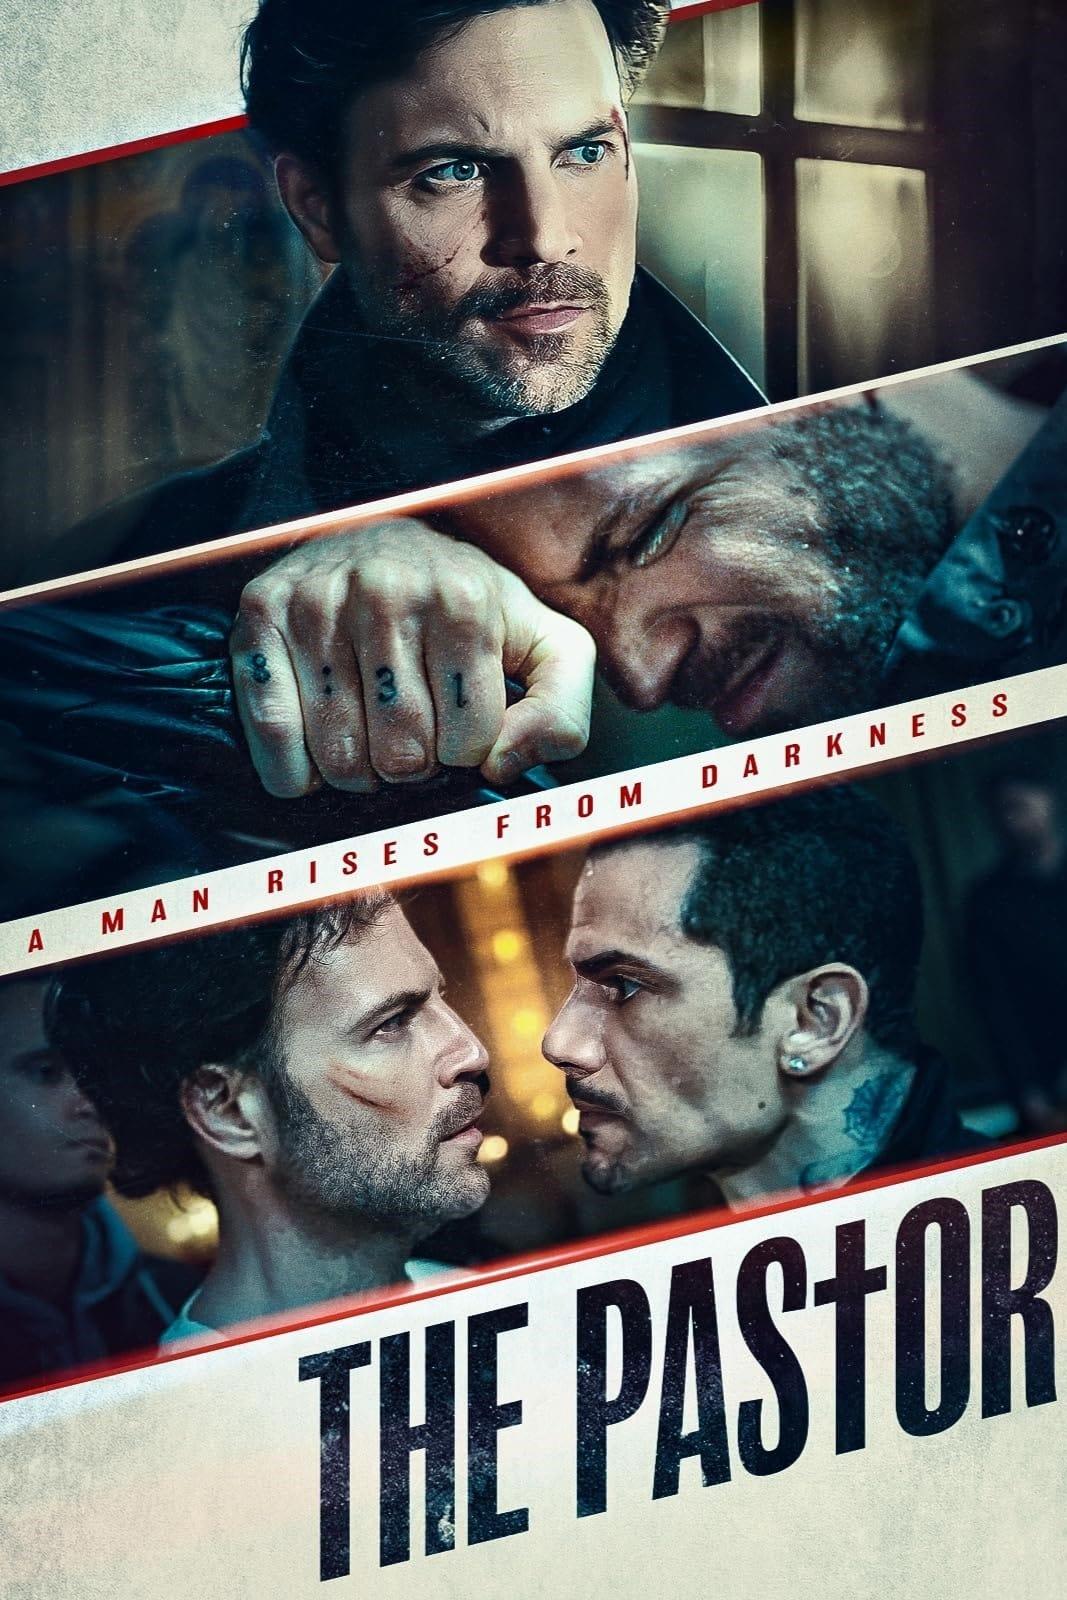 The Pastor poster